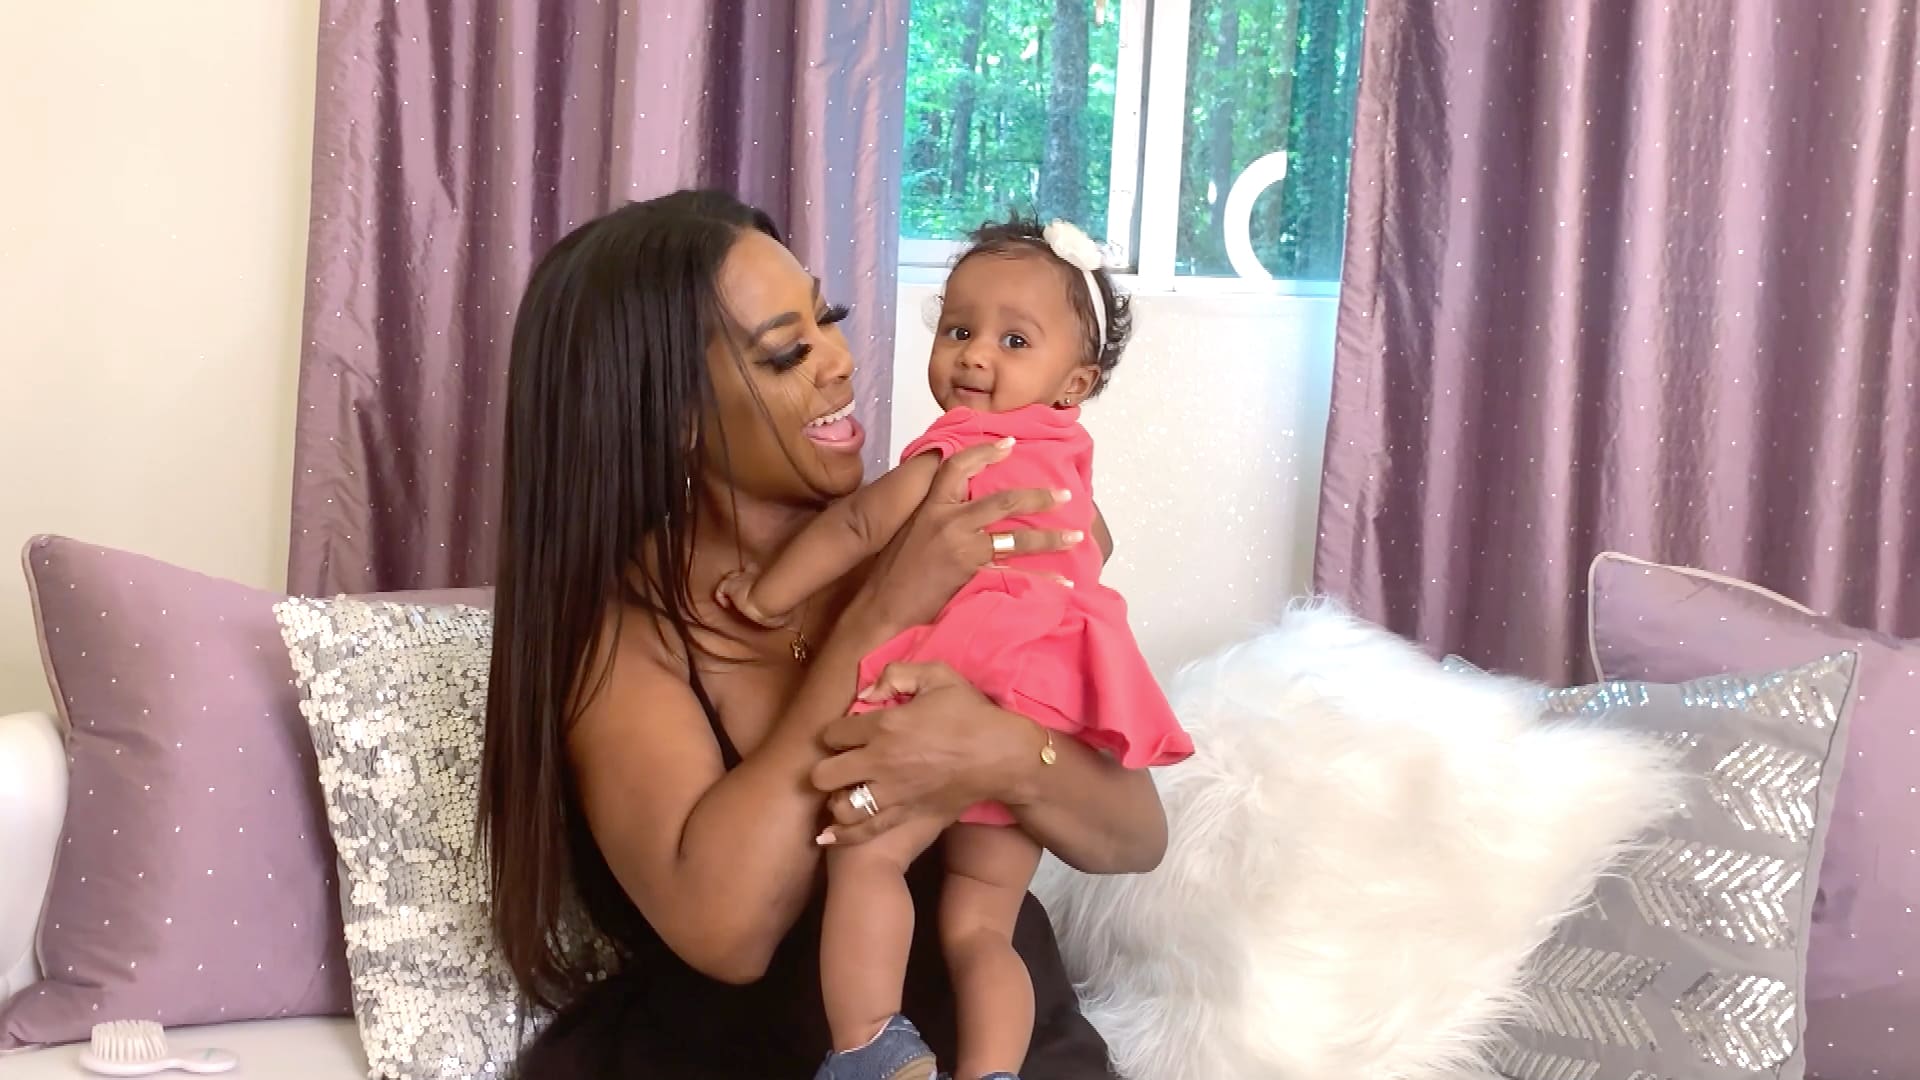 Kenya Moore's Baby Brooklyn Daly Thinks She's A Comedian - See The Video